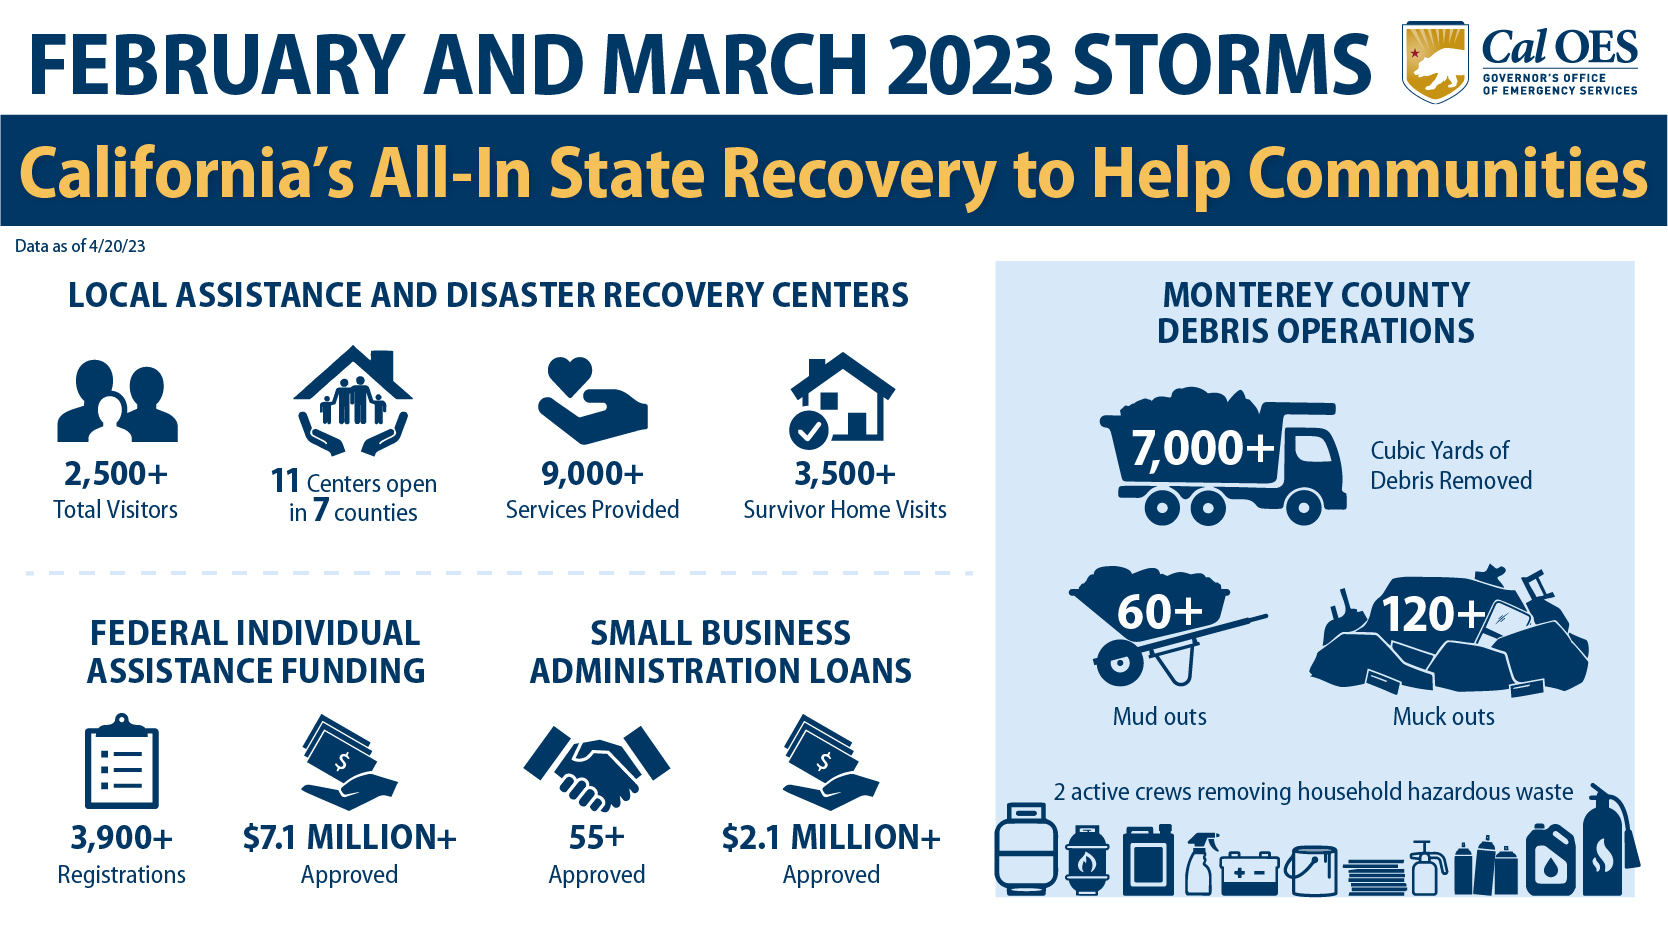 February and March 2023 Storms California’s All-In State Recovery to Help Communities Local Assistance and Disaster Recovery Centers 11 centers open in 7 counties 2,500 total visitors 9,000+ services provided Survivor Home Visits 3,500+ Monterey County Debris Operations 7,000+ cubic yards of debris removed 120+ muck outs 60+ mud outs 2 active crews removing household hazardous waste Federal Individual Assistance Funding 3,990+ registrations $7.1+ million approved Small Business Administration Loans 55+ Approved $2.1 million+ Approved Data as of 4/20/23